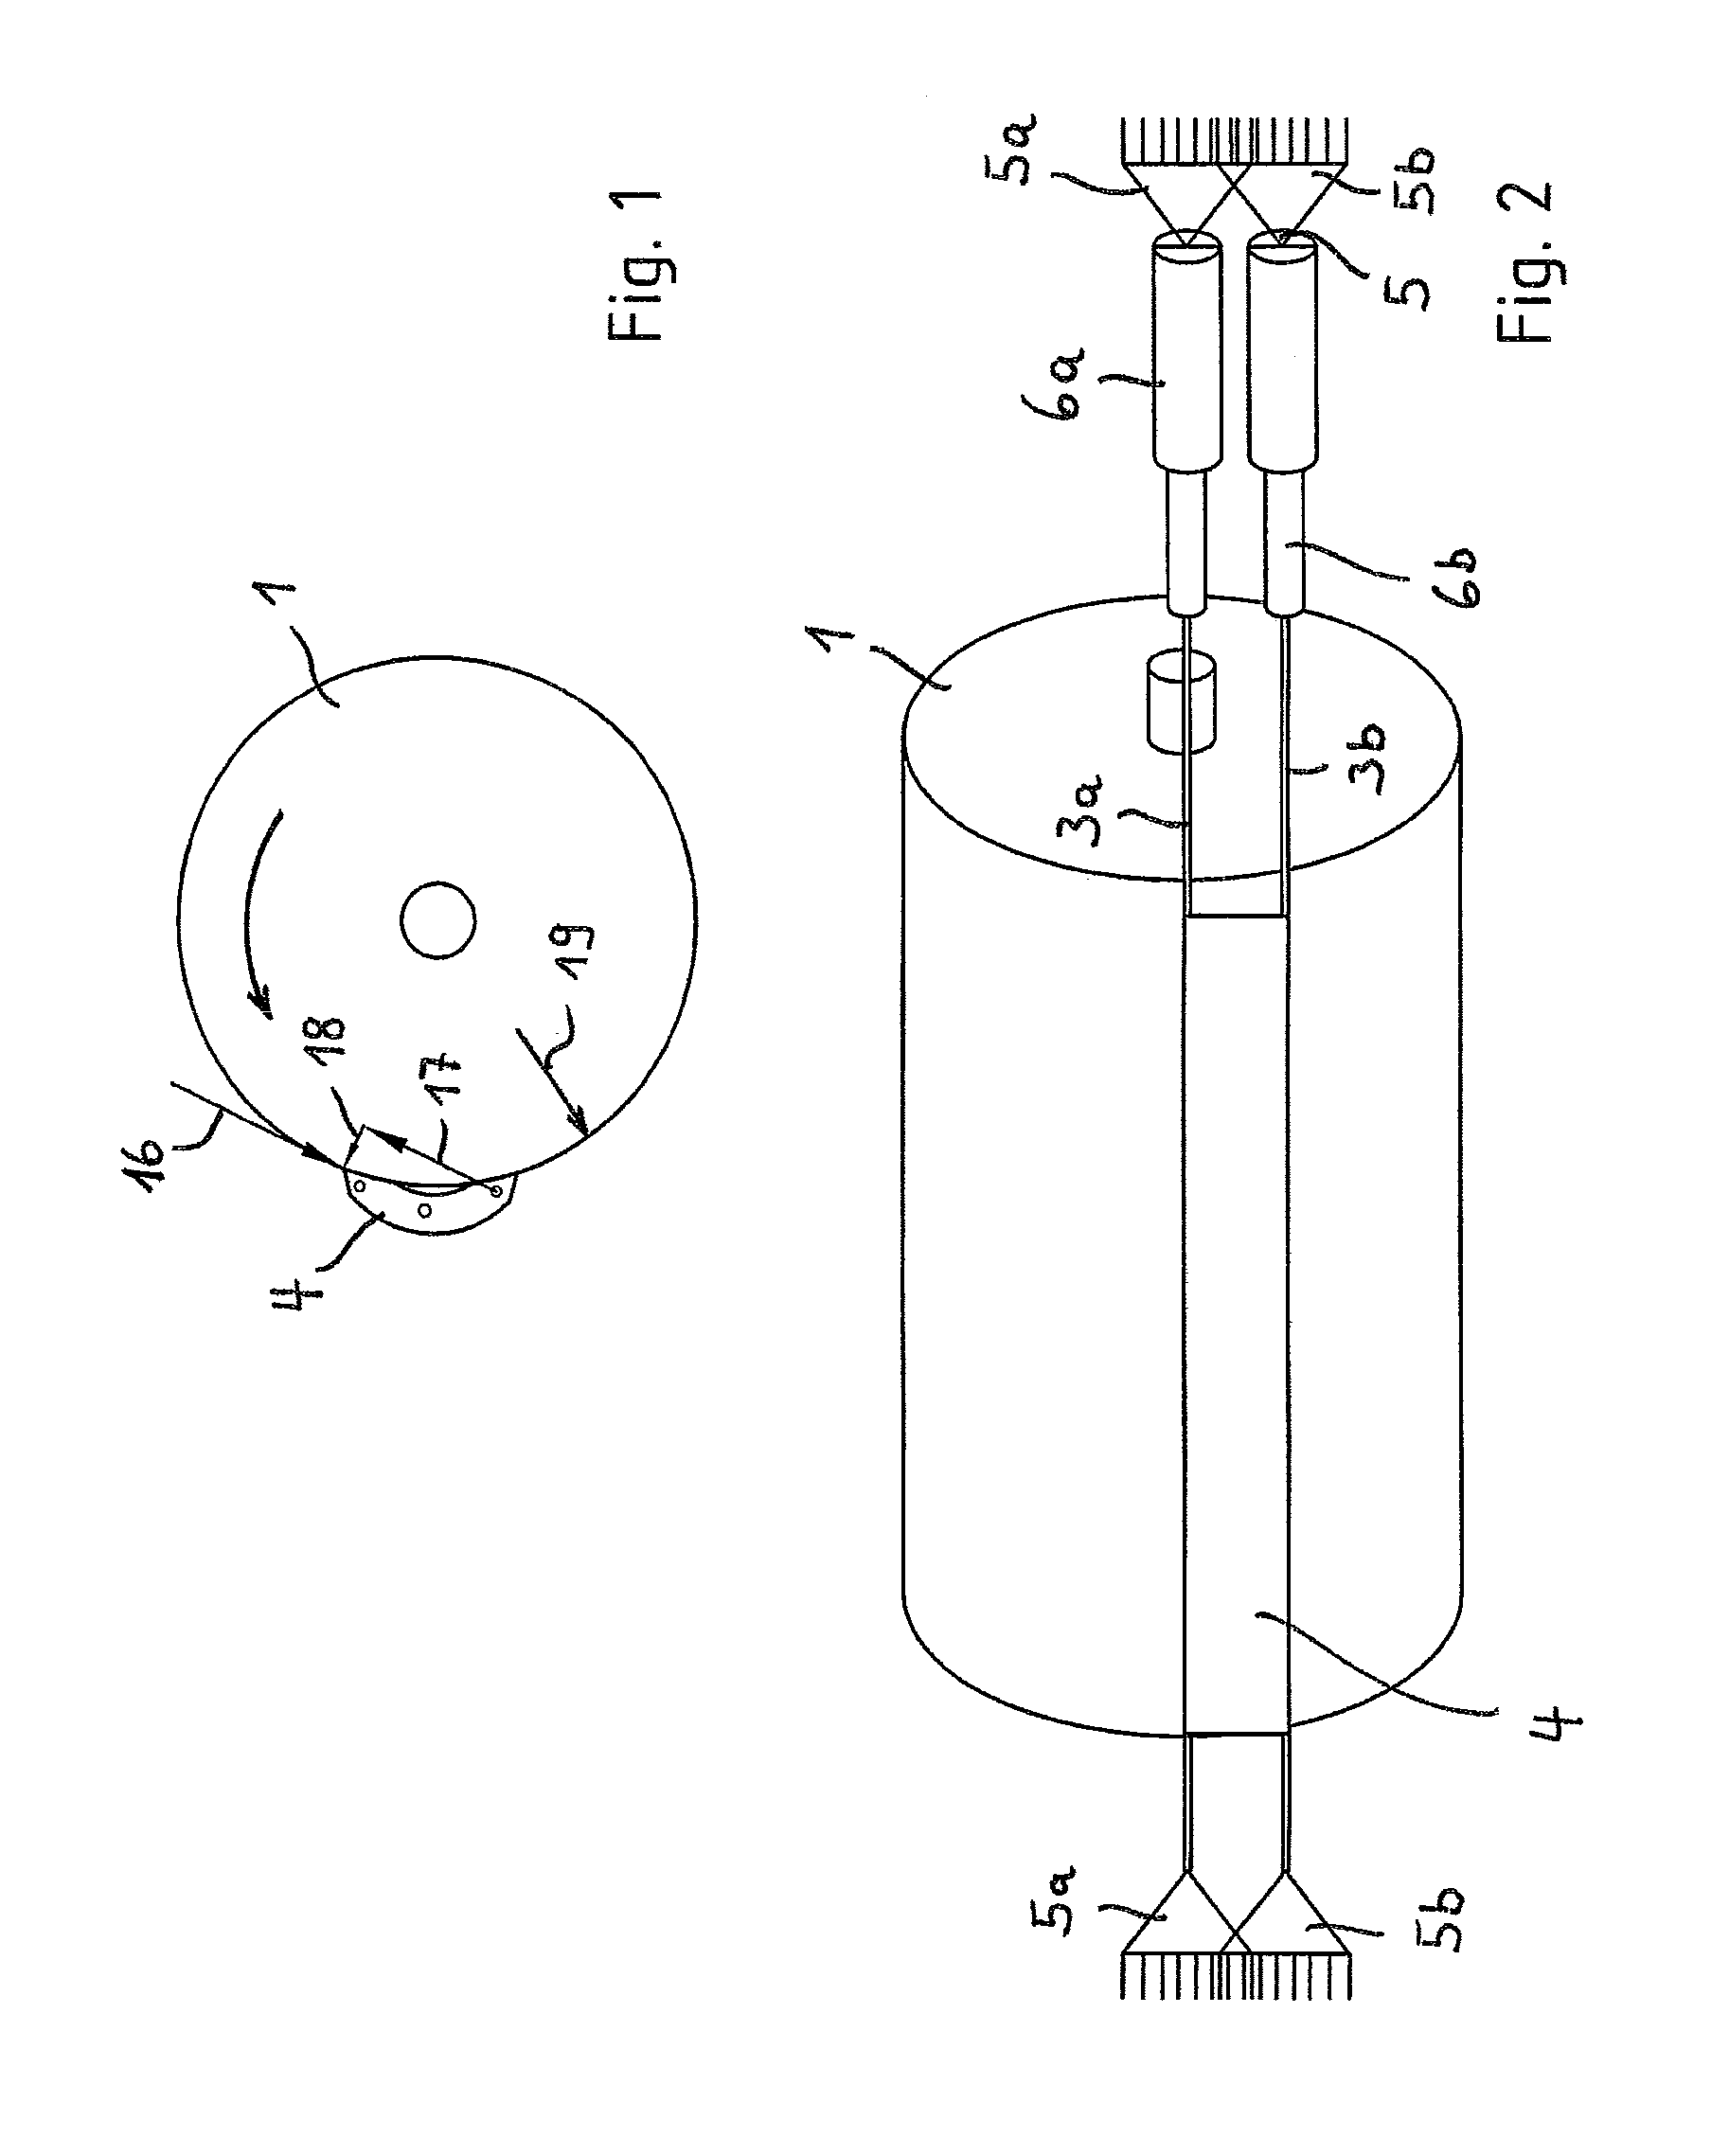 Device for stripping off material from a conveyor belt of a belt conveyor